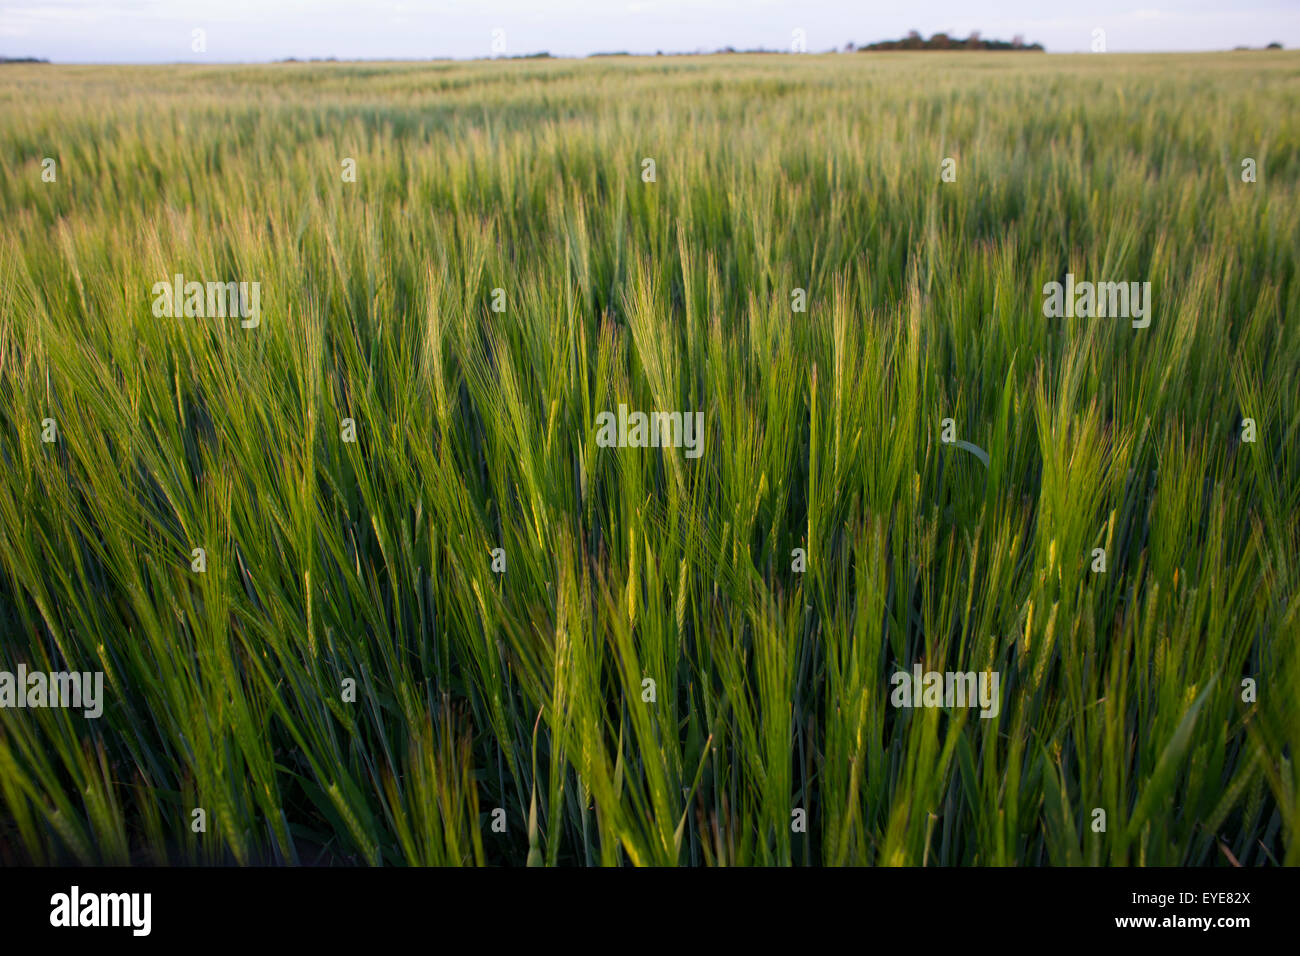 barley production in the Netherlands Stock Photo